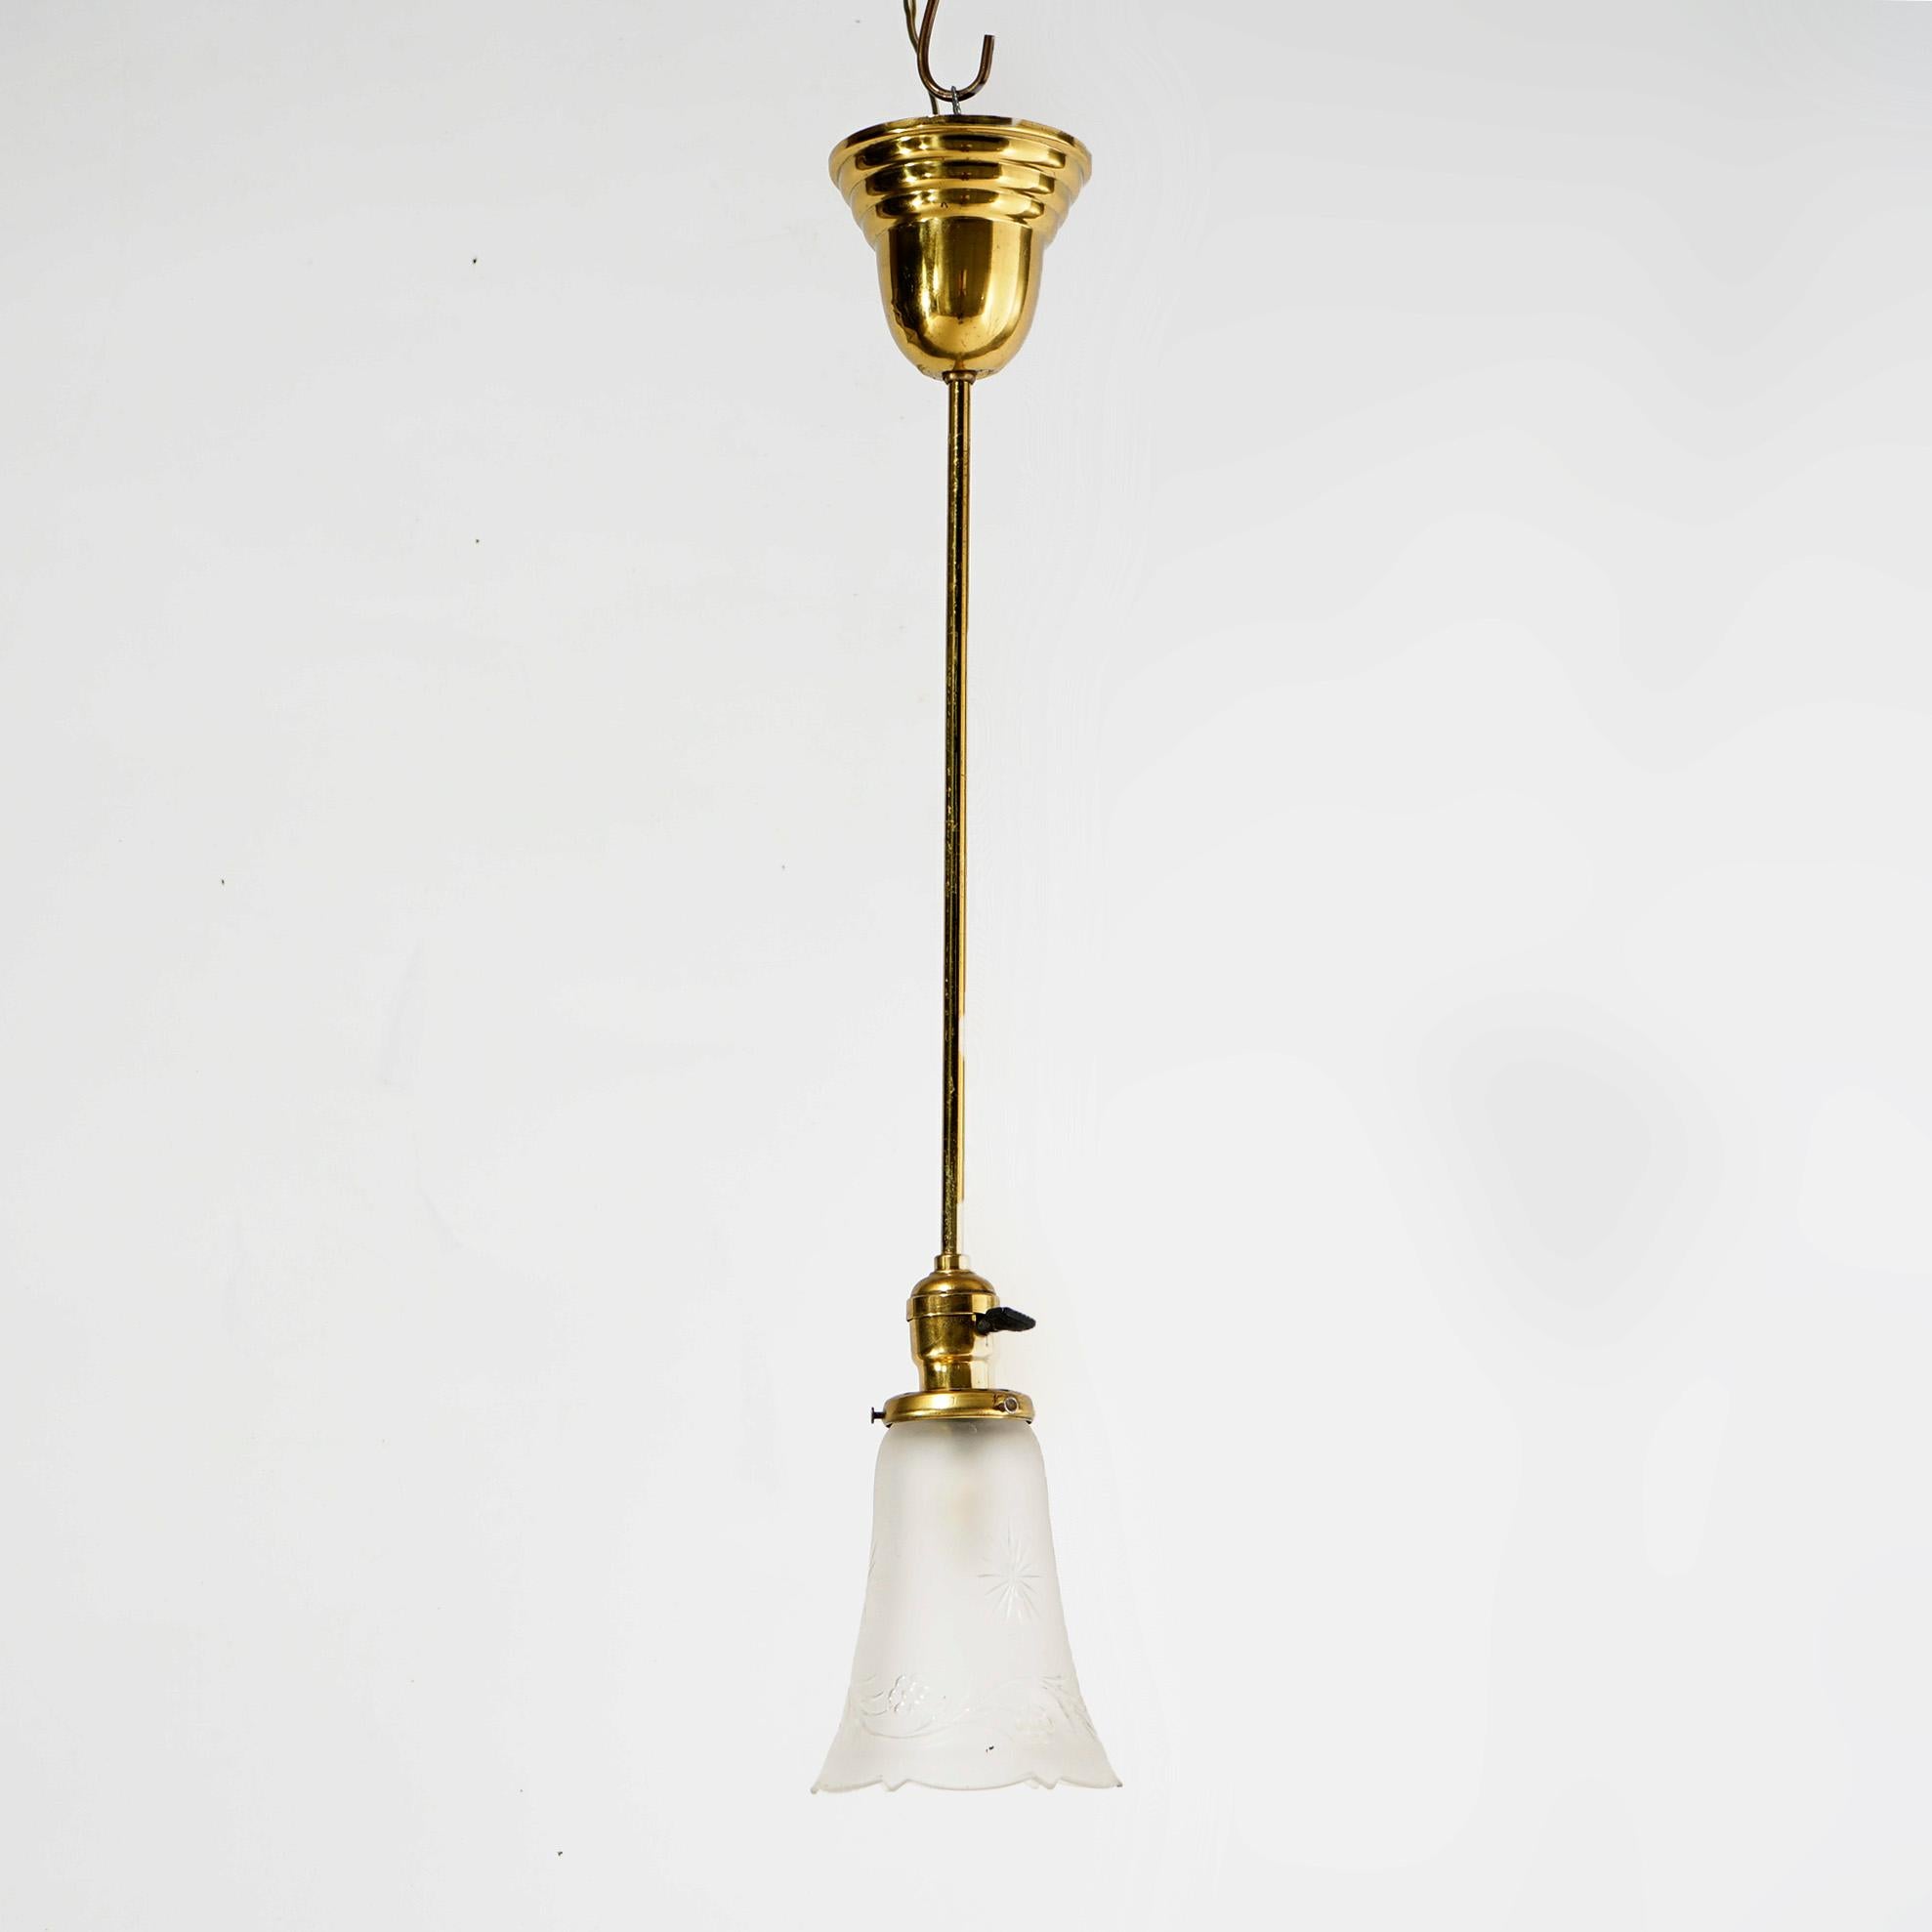 An antique hall light offers brass frame and shaft terminating in single light with frosted shade having etched floral decoration, c1920

Measures- 27.5''H x 4.75''W x 4.75''D.

Catalogue Note: Ask about DISCOUNTED DELIVERY RATES available to most